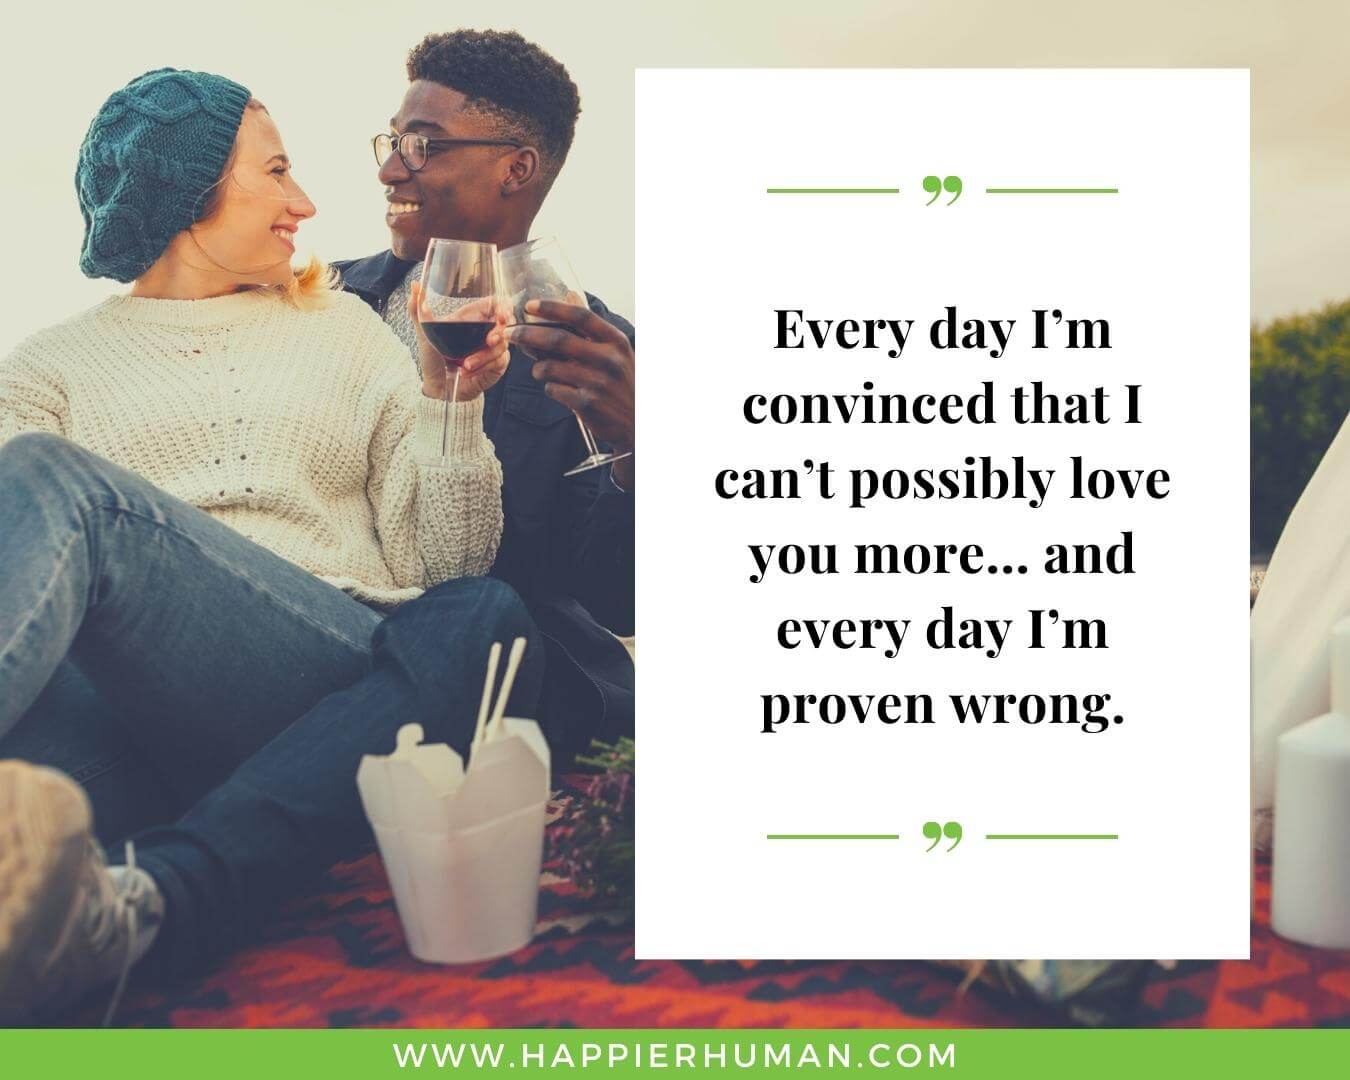 Unconditional Love Quotes for Her - “Every day I’m convinced that I can’t possibly love you more… and every day I’m proven wrong.”